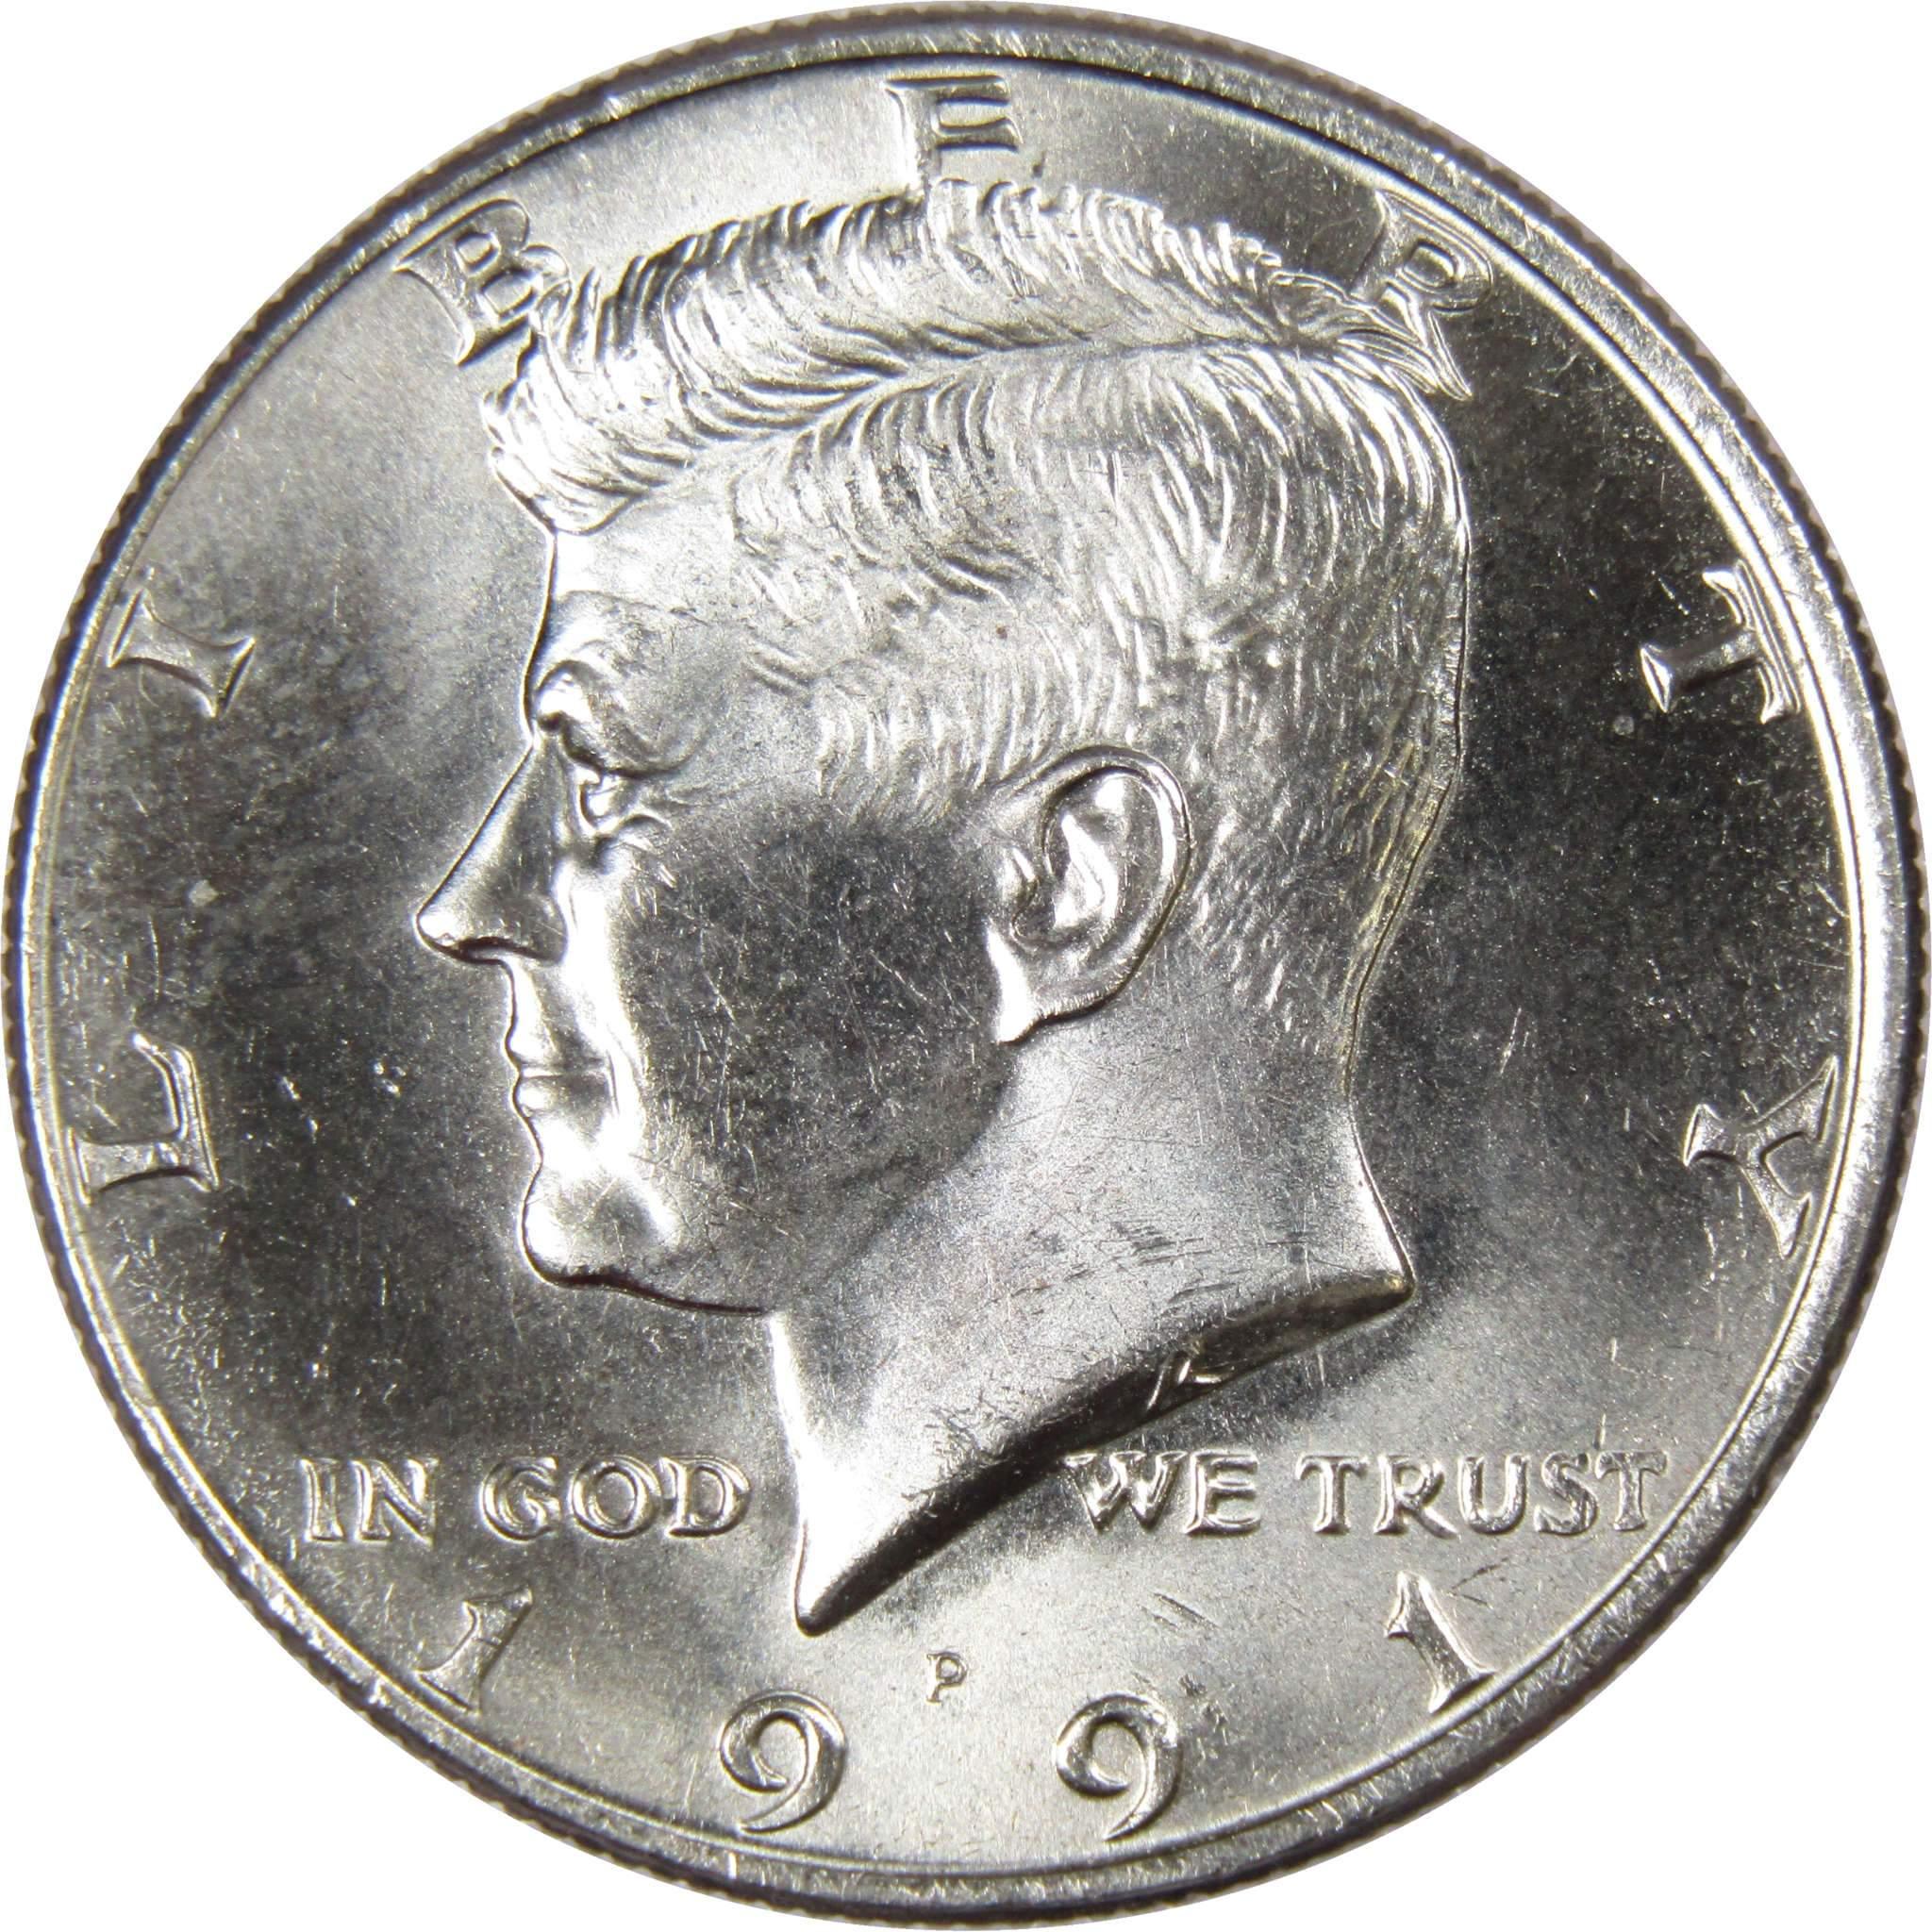 1991 P Kennedy Half Dollar BU Uncirculated Mint State 50c US Coin Collectible